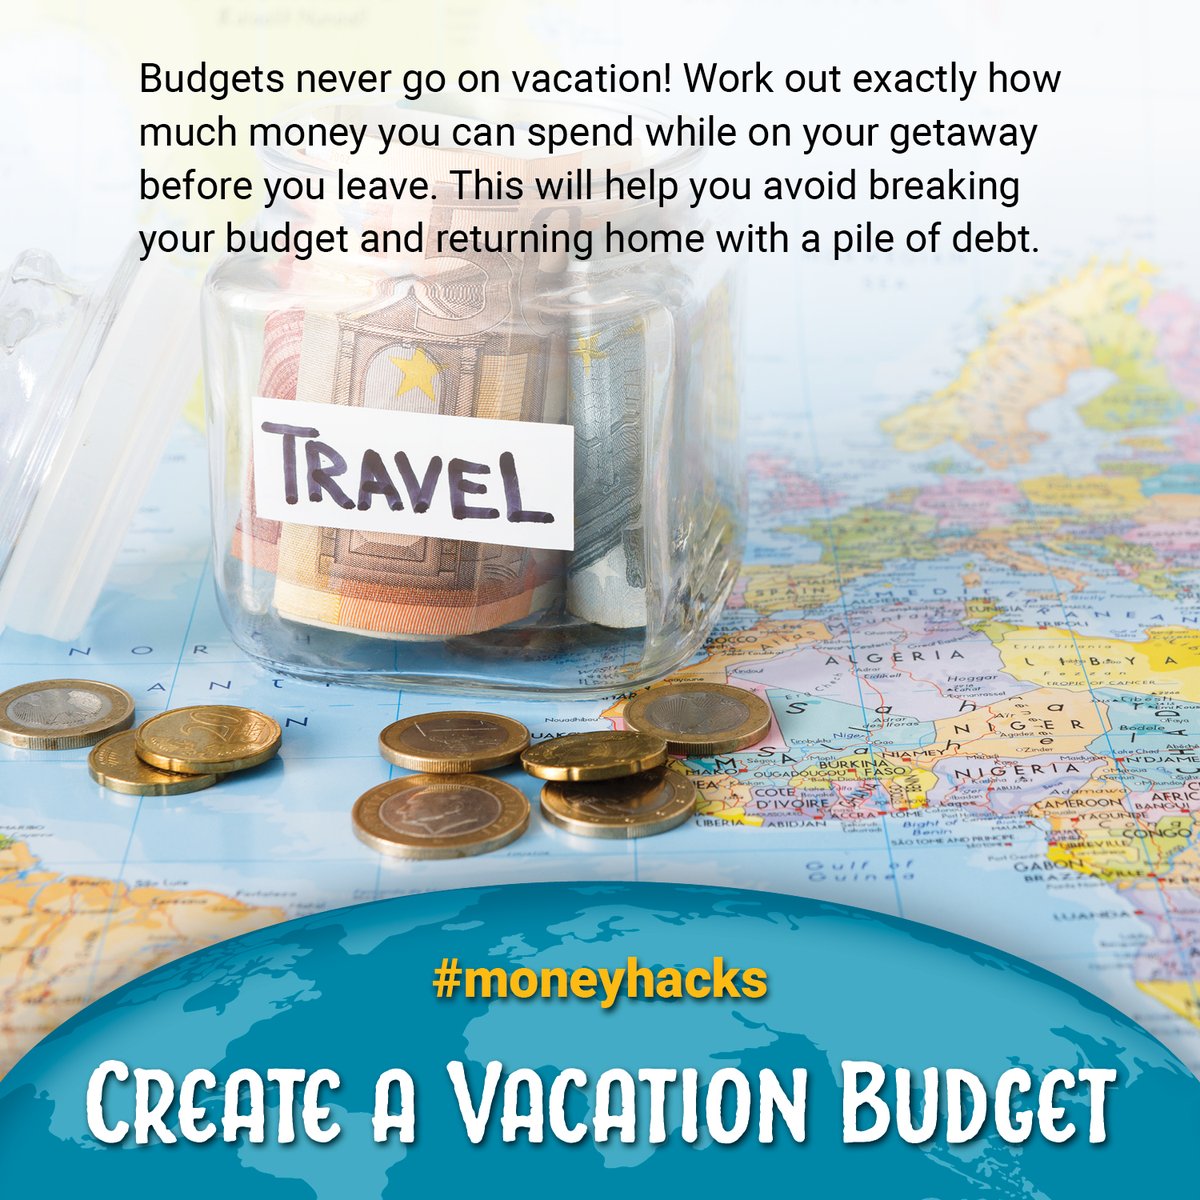 It's not too late to begin!
#alpinecu #getstarted #financefriday #moneyhack #travel #budget #save #lessstress #vacation #savings #creditunion #utahcreditunion